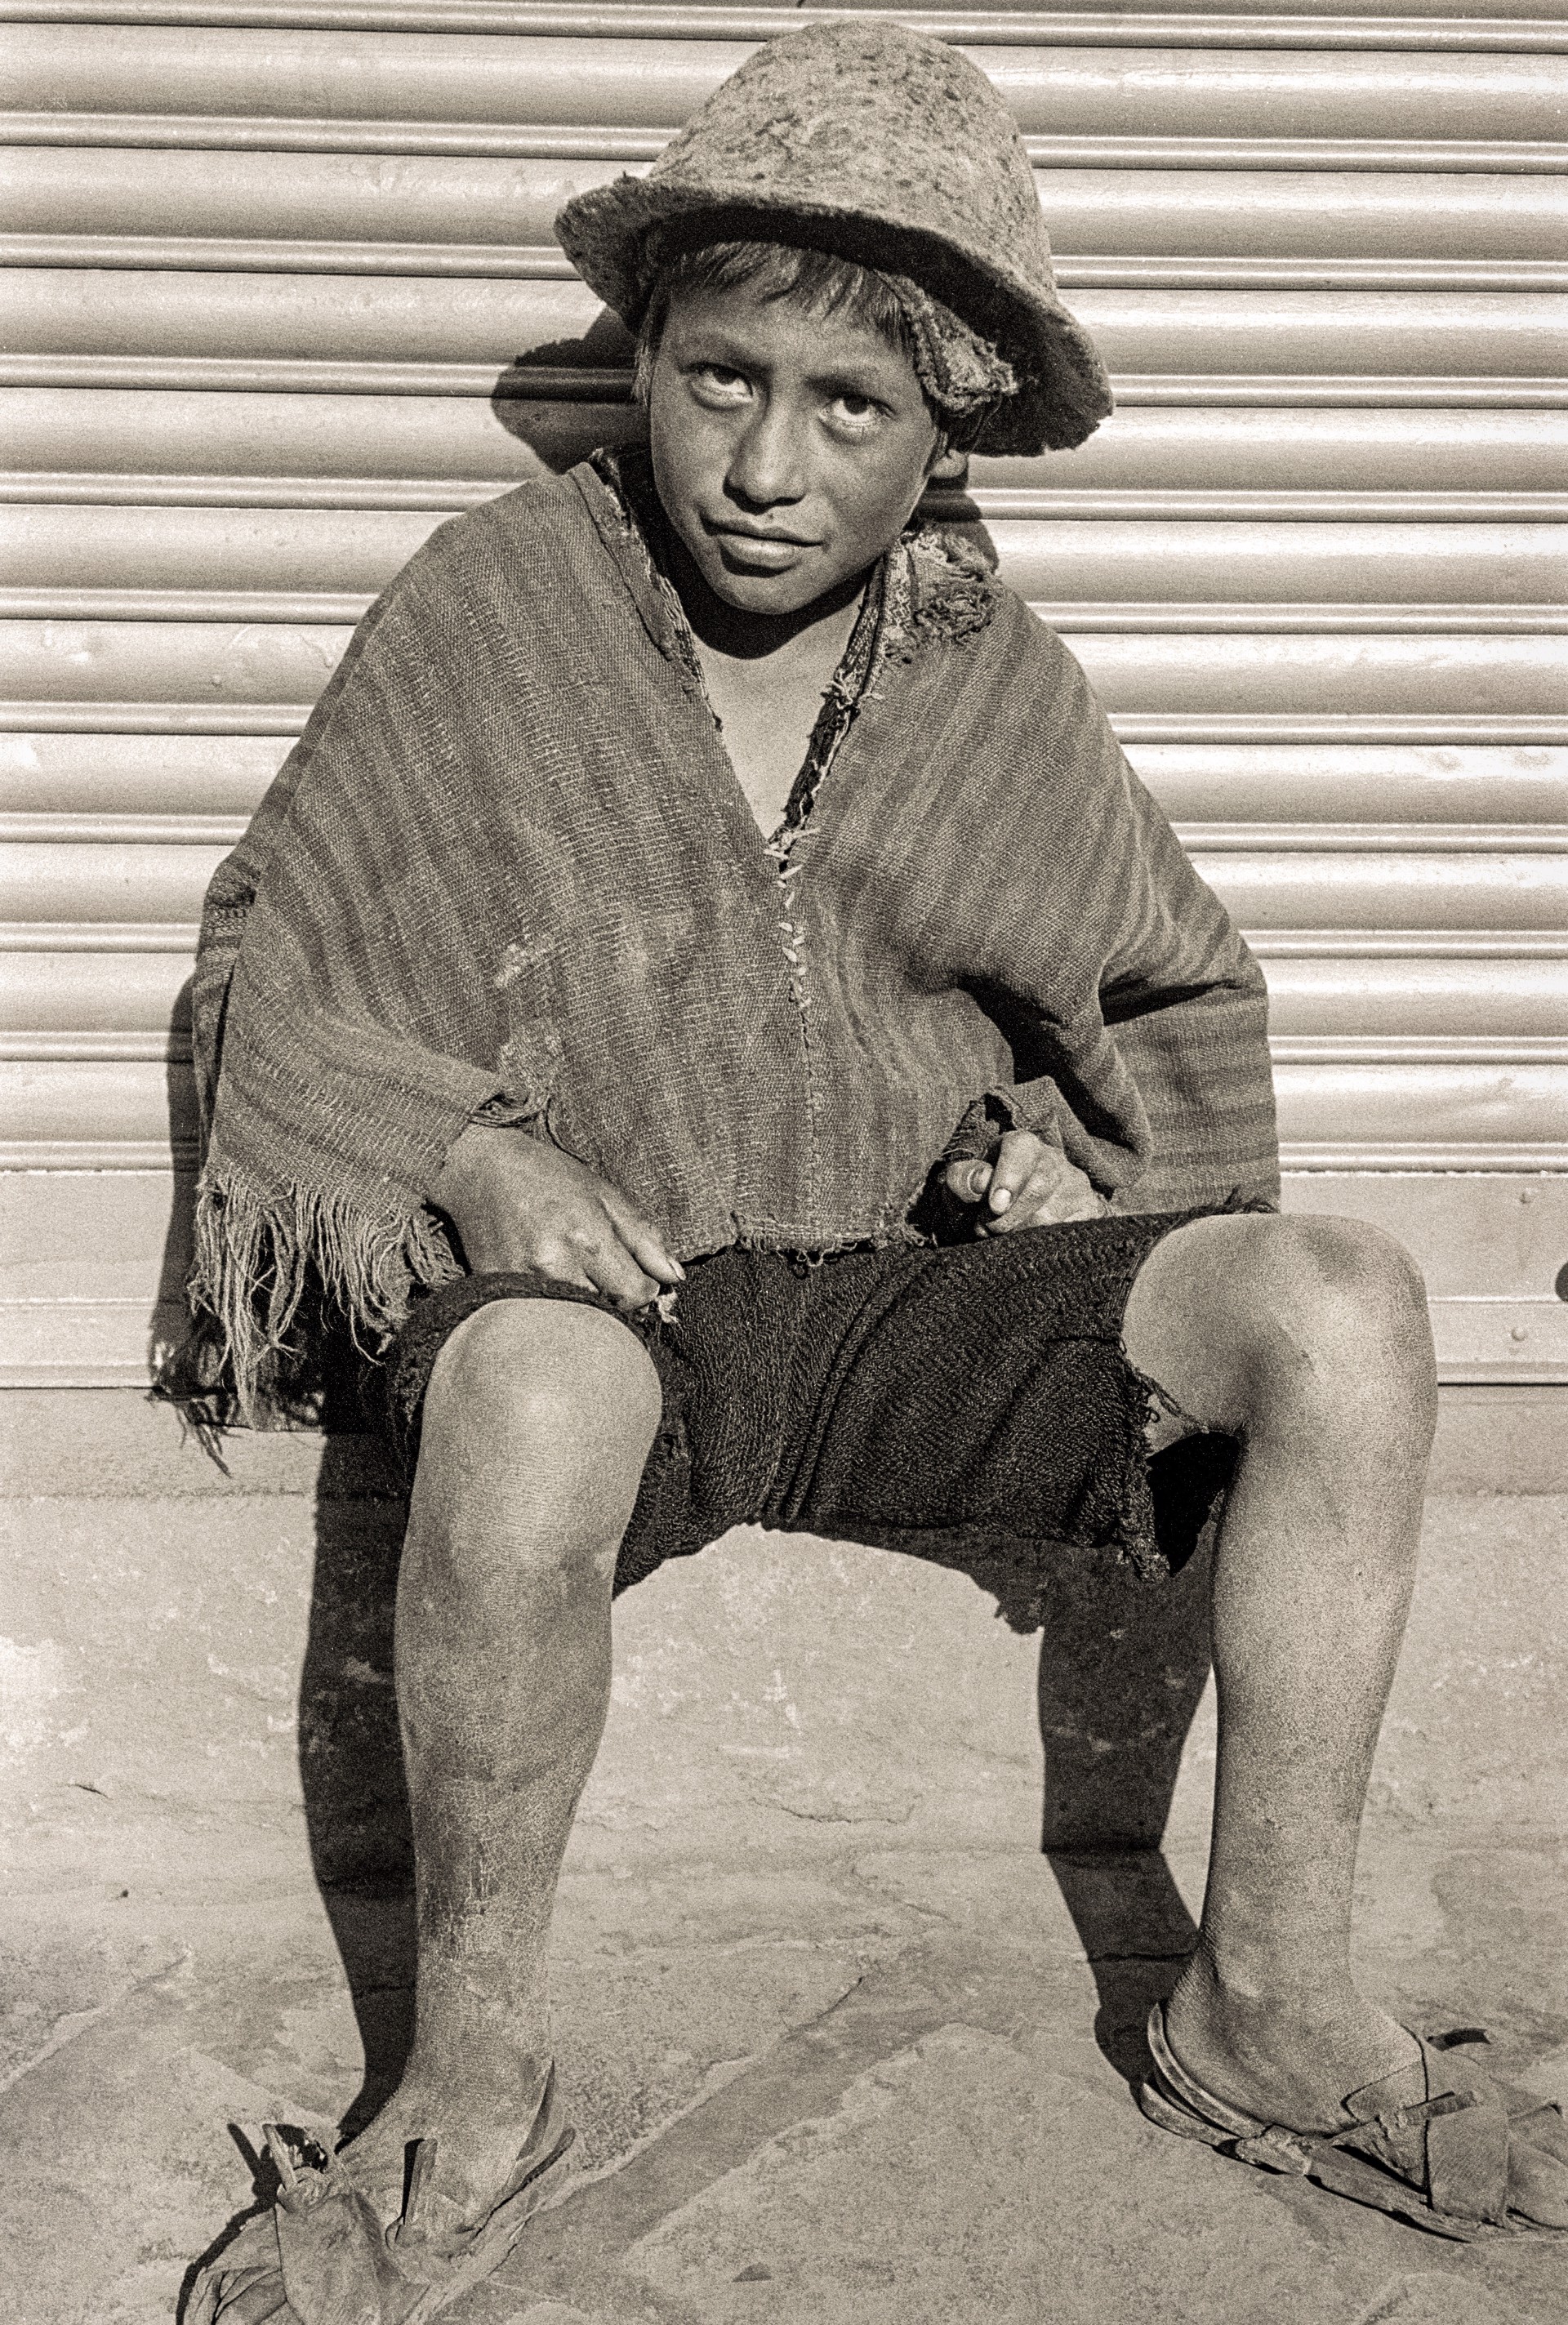 Andean Boy with Hat by Jack Dempsey